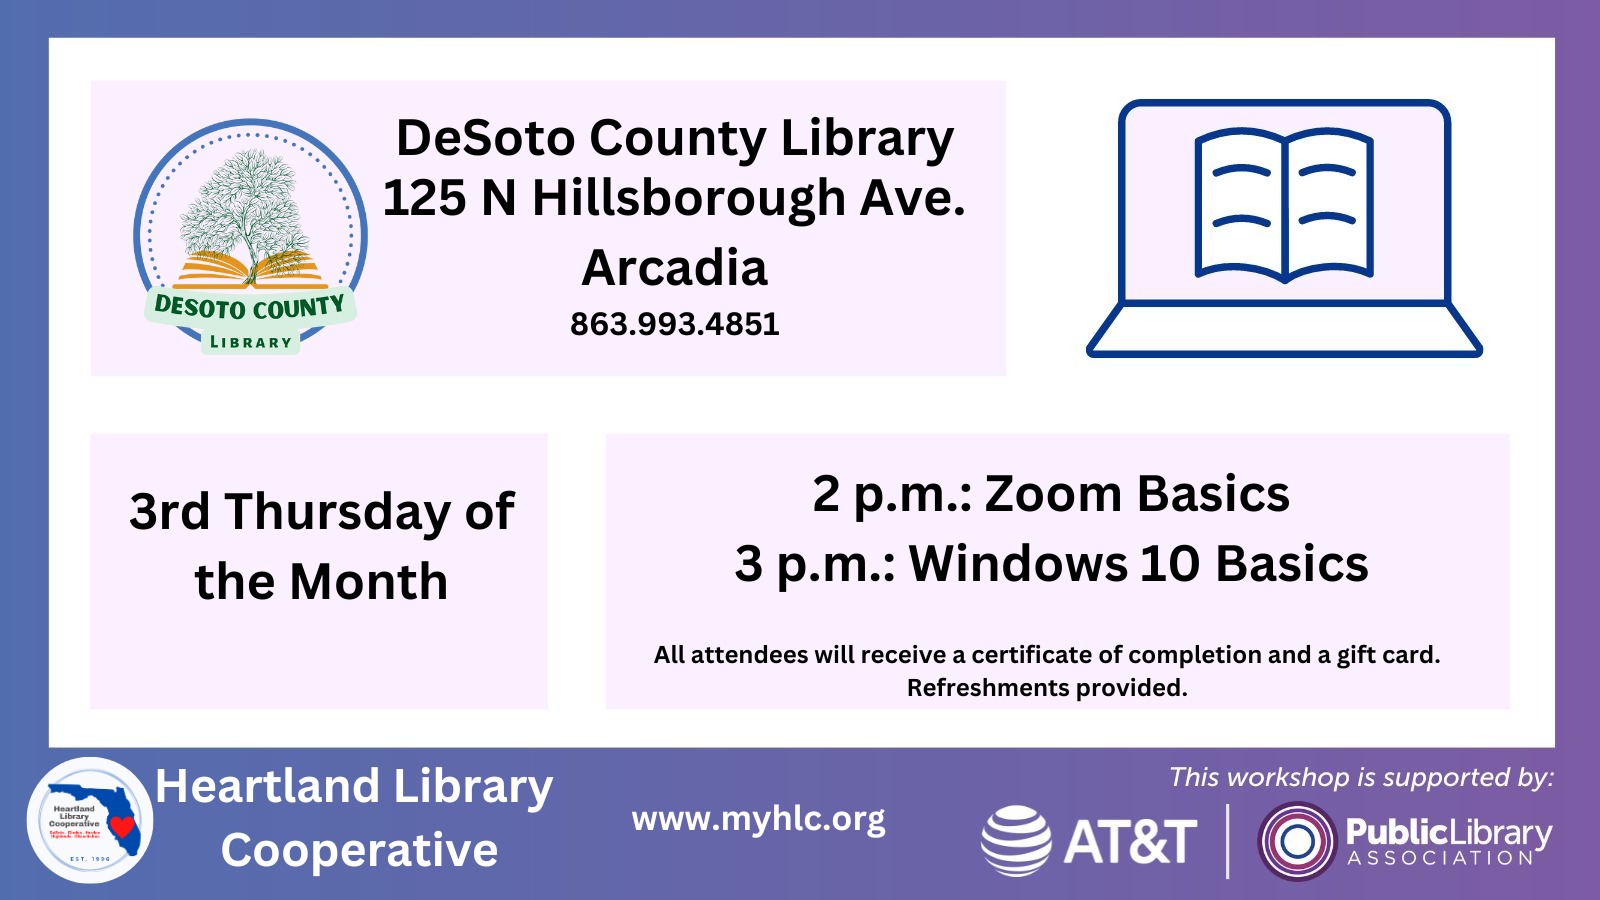 On the third Thursday of each month, DeSoto County Library will be hosting a Zoom basics course at 2 p.m. and a Windows 10 basics course at 3 p.m.